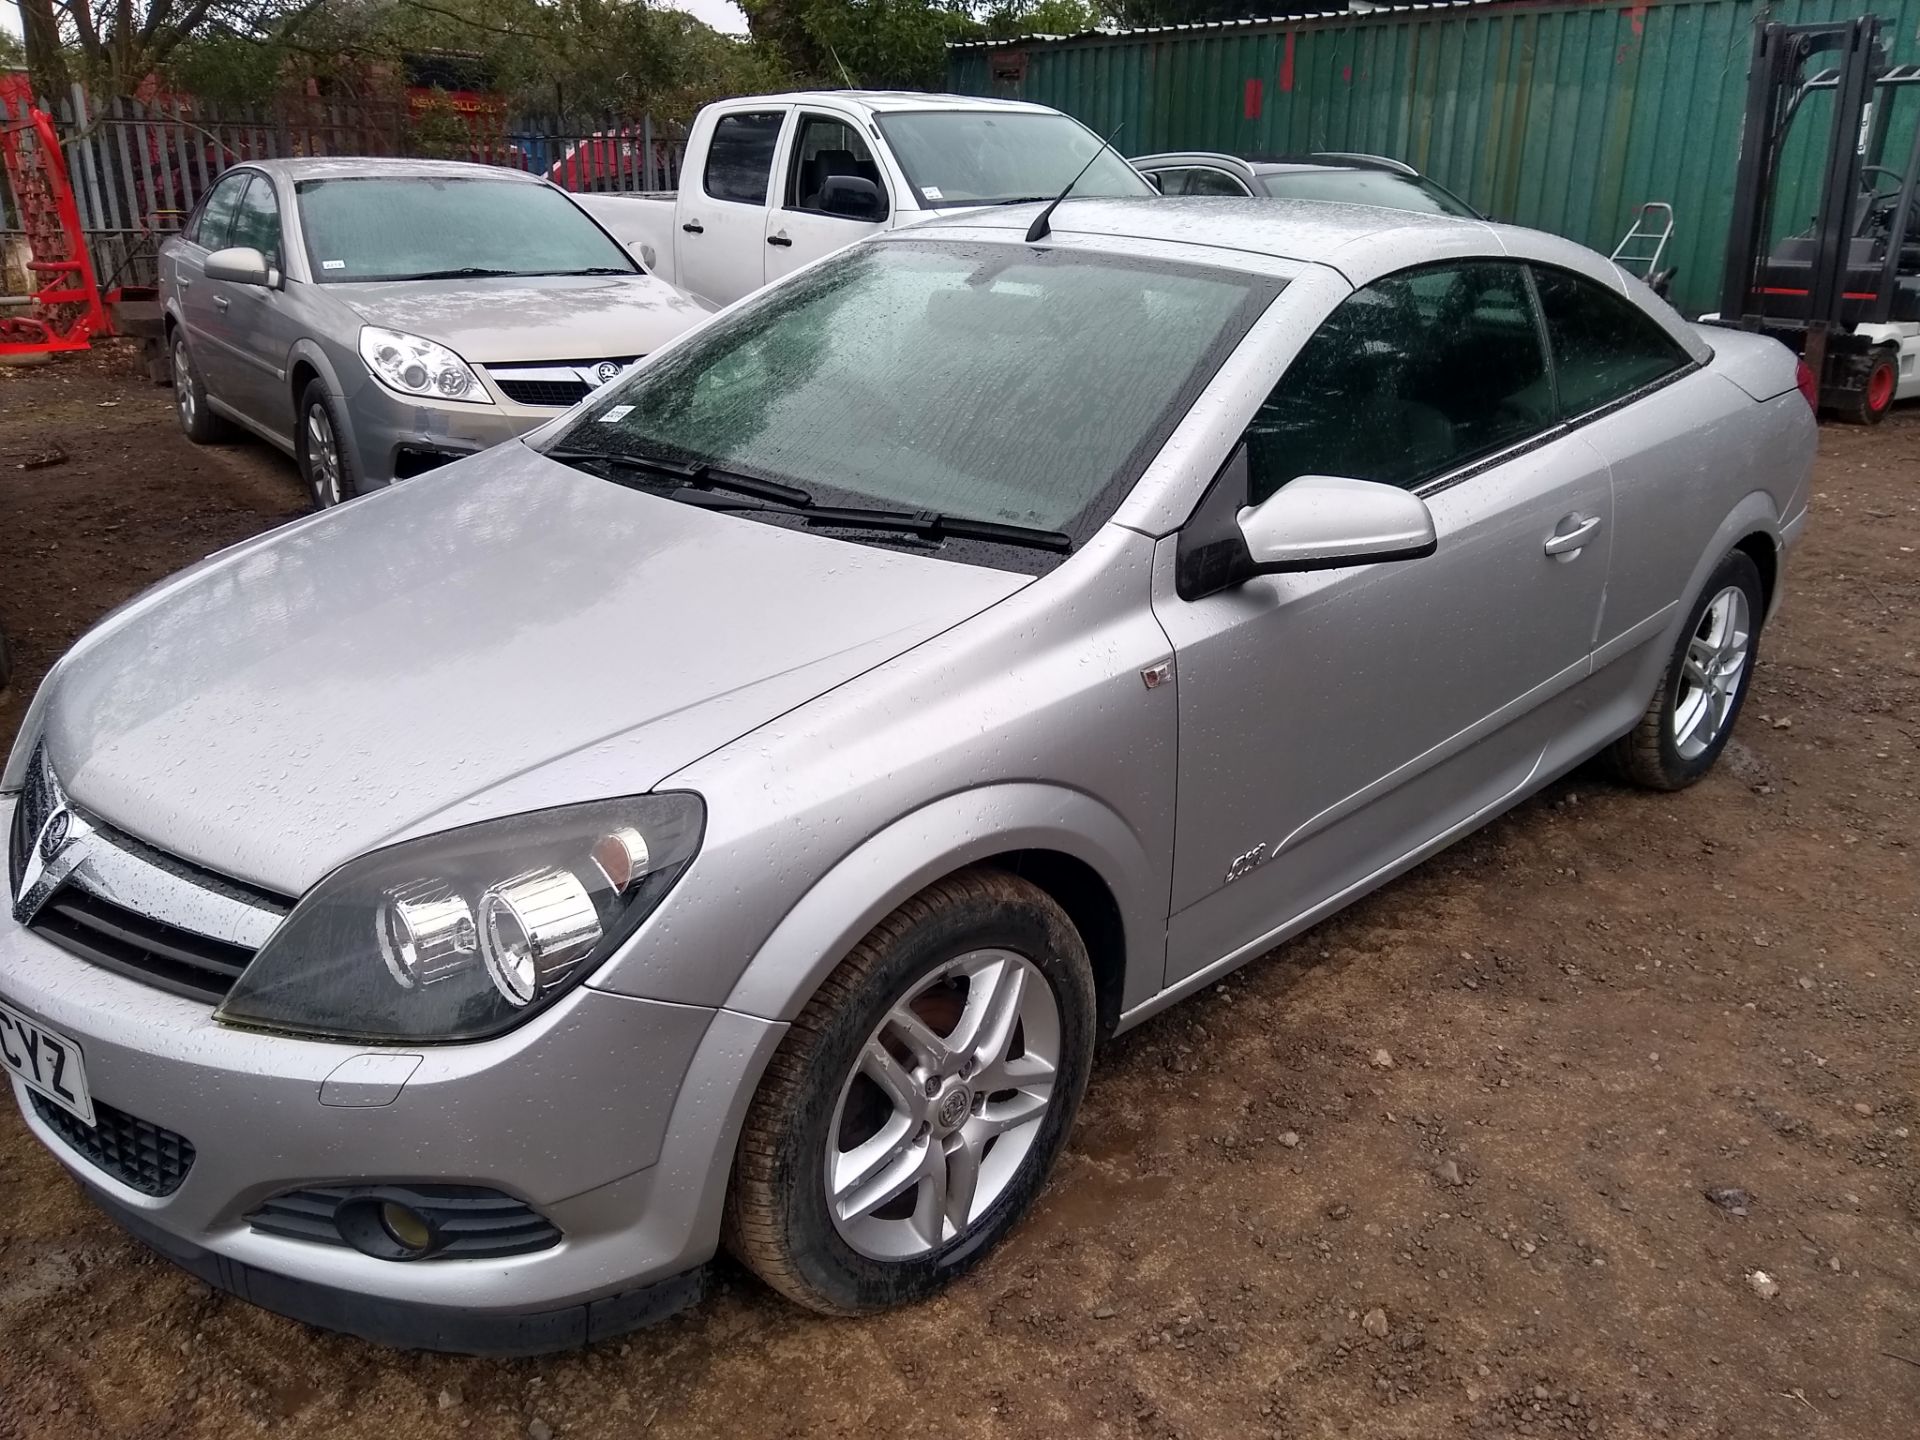 2007 Vauxhall Astra Convertible KB07CYZ 2007 Vauxhall Astra 1.8 Twin Top Convertible, MOT EXP - 00's - Image 6 of 10